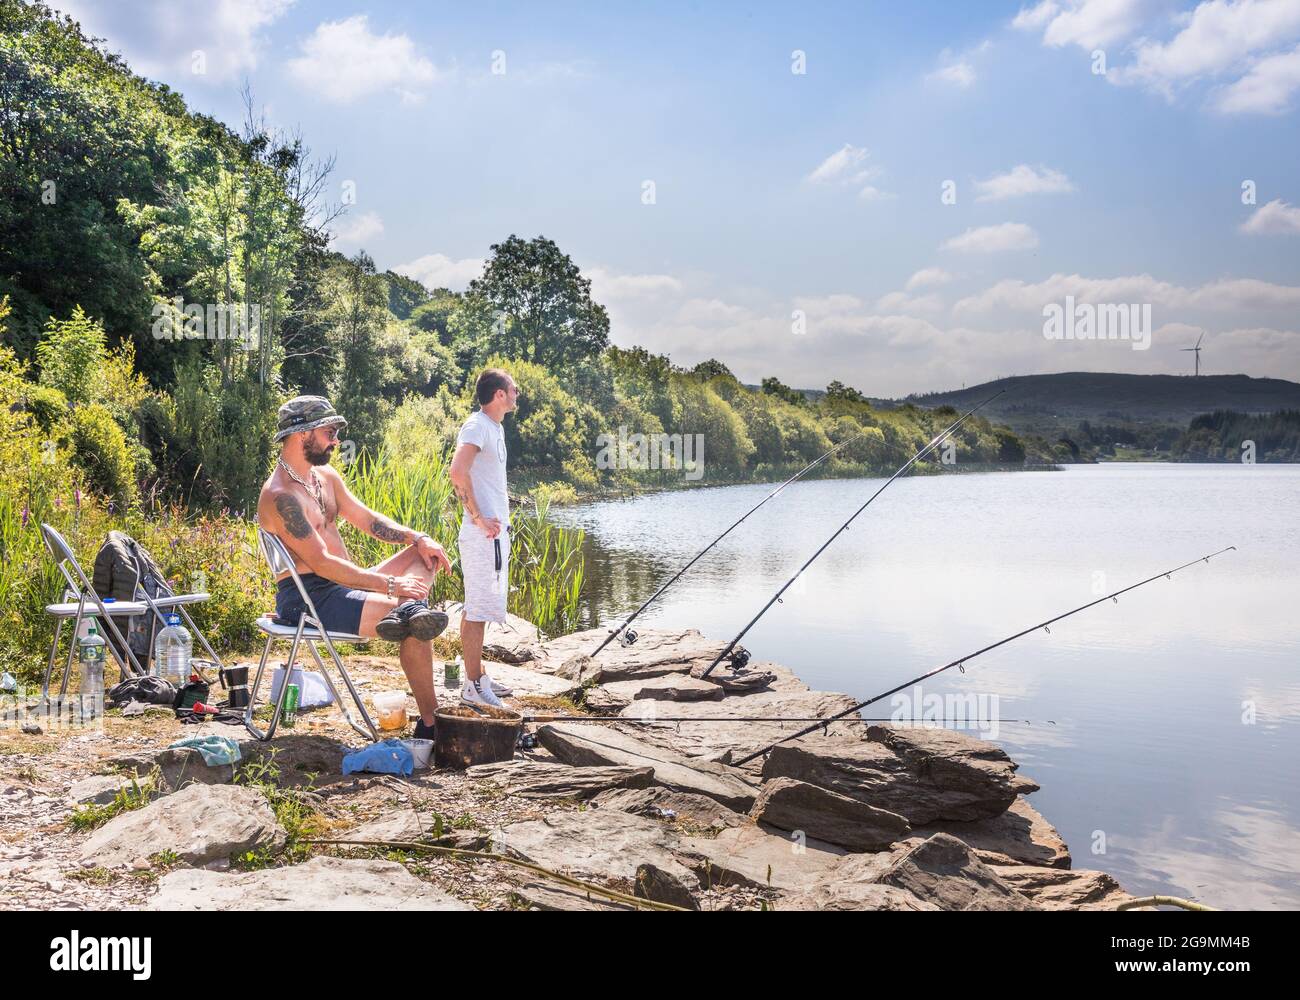 Ballingeary, Cork, Ireland. 24th July, 2021. Fishermen Adrian Dami and Mike Figueredo from Italy spend a hot summer's day on the banks of Lough Aulla Stock Photo